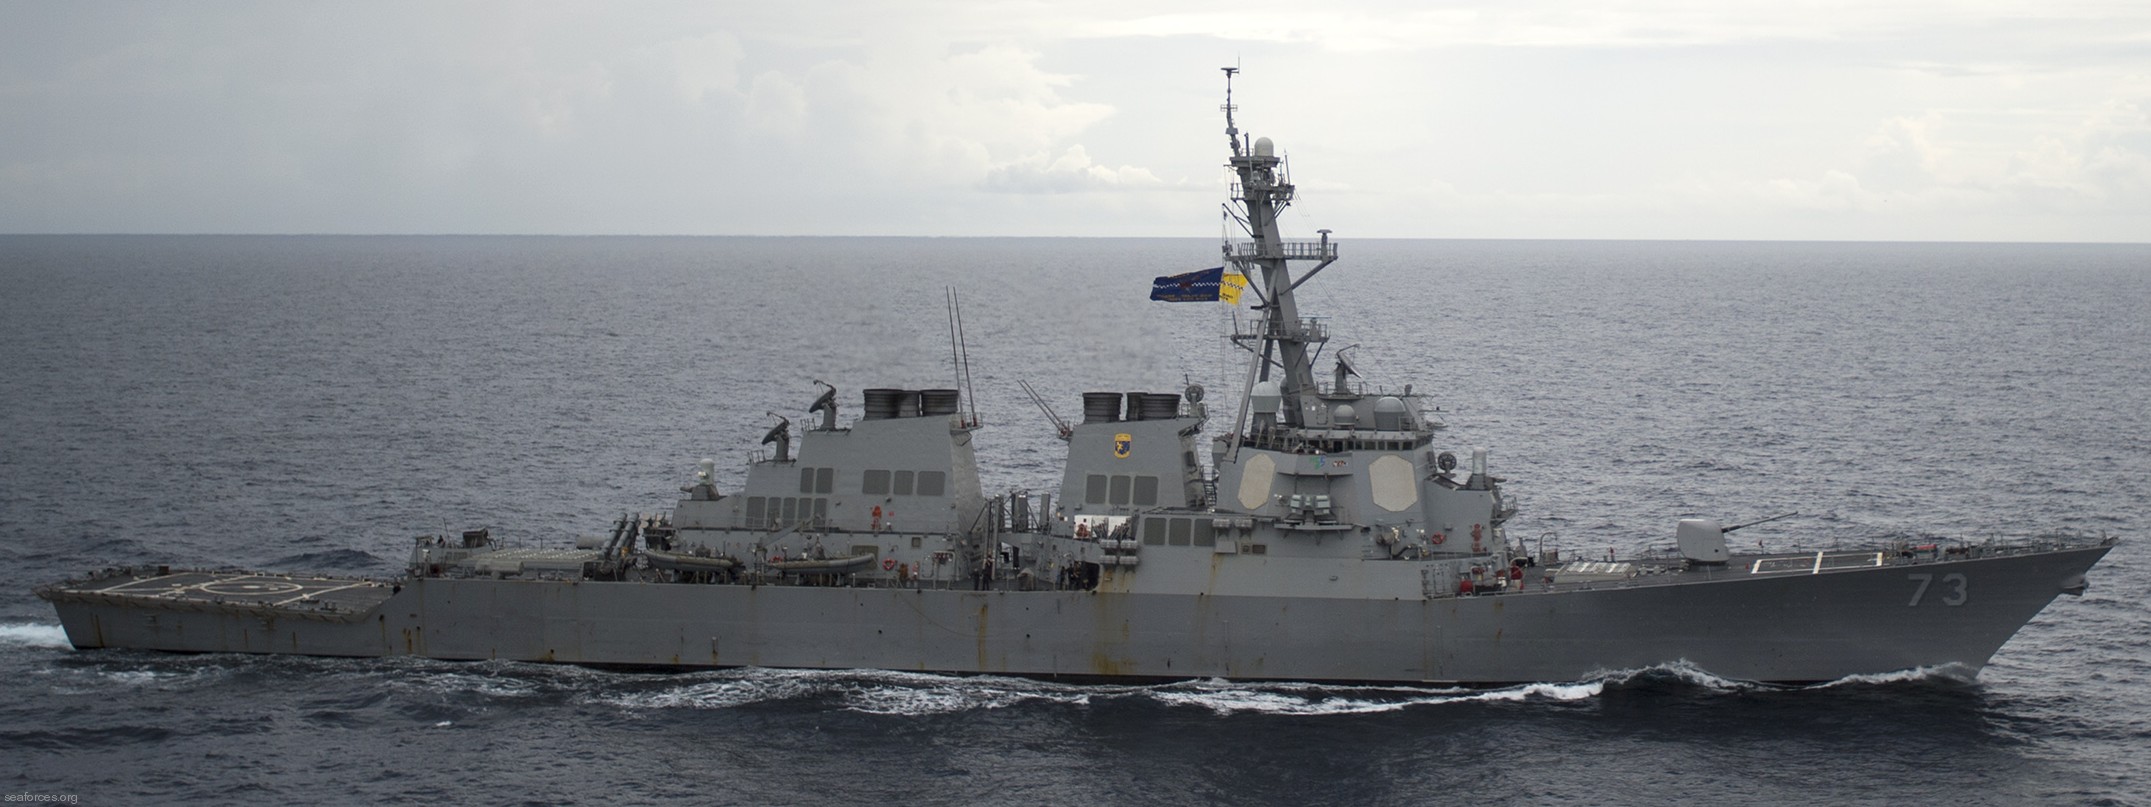 ddg-73 uss decatur guided missile destroyer arleigh burke class aegis bmd 06 south china sea